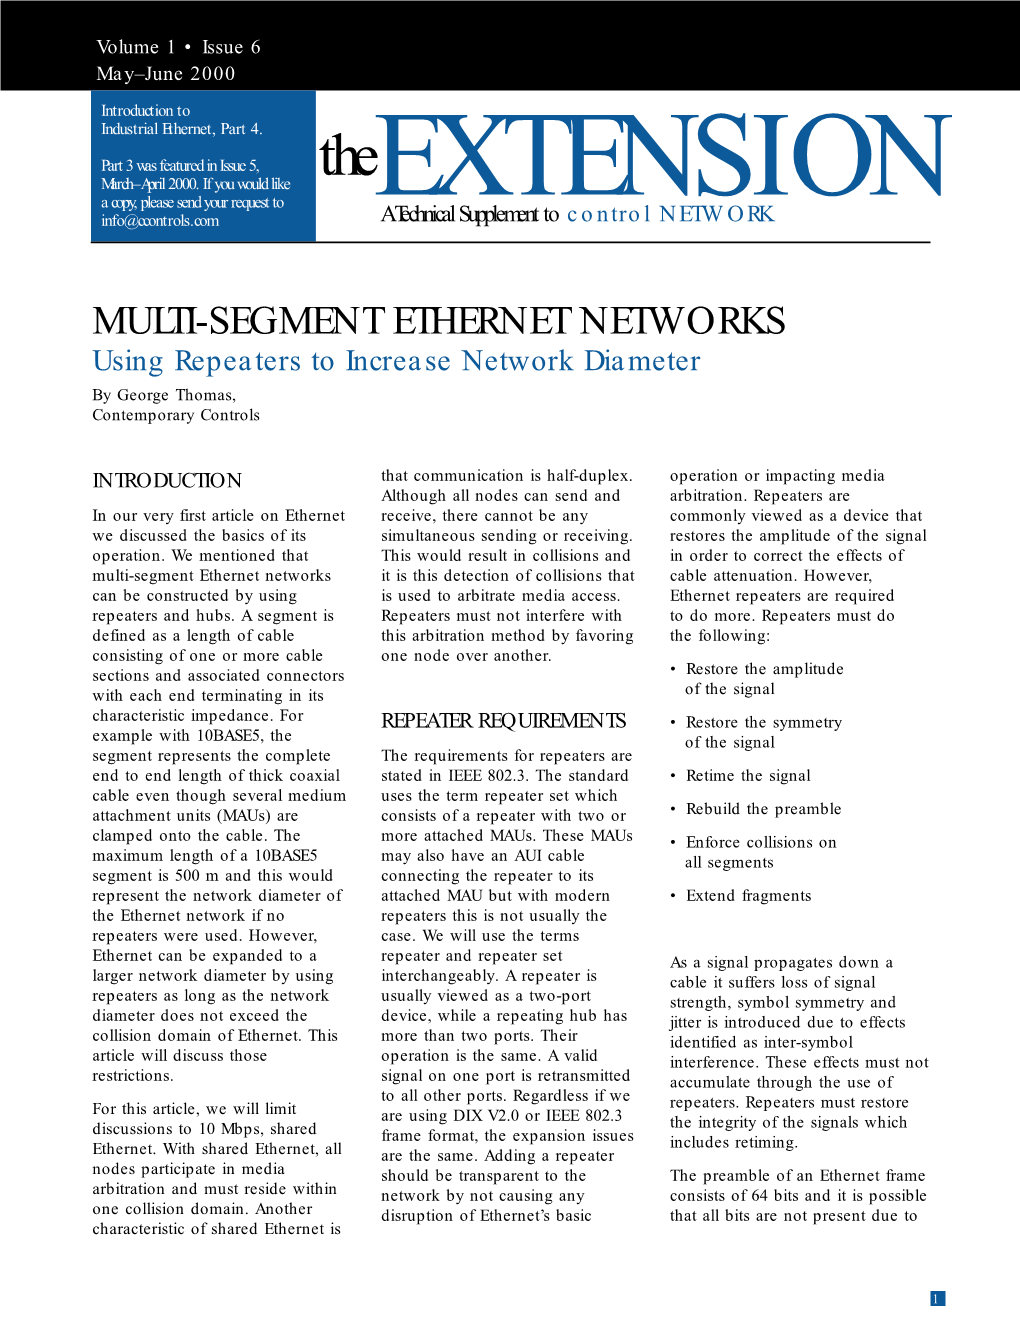 MULTI-SEGMENT ETHERNET NETWORKS Using Repeaters to Increase Network Diameter by George Thomas, Contemporary Controls